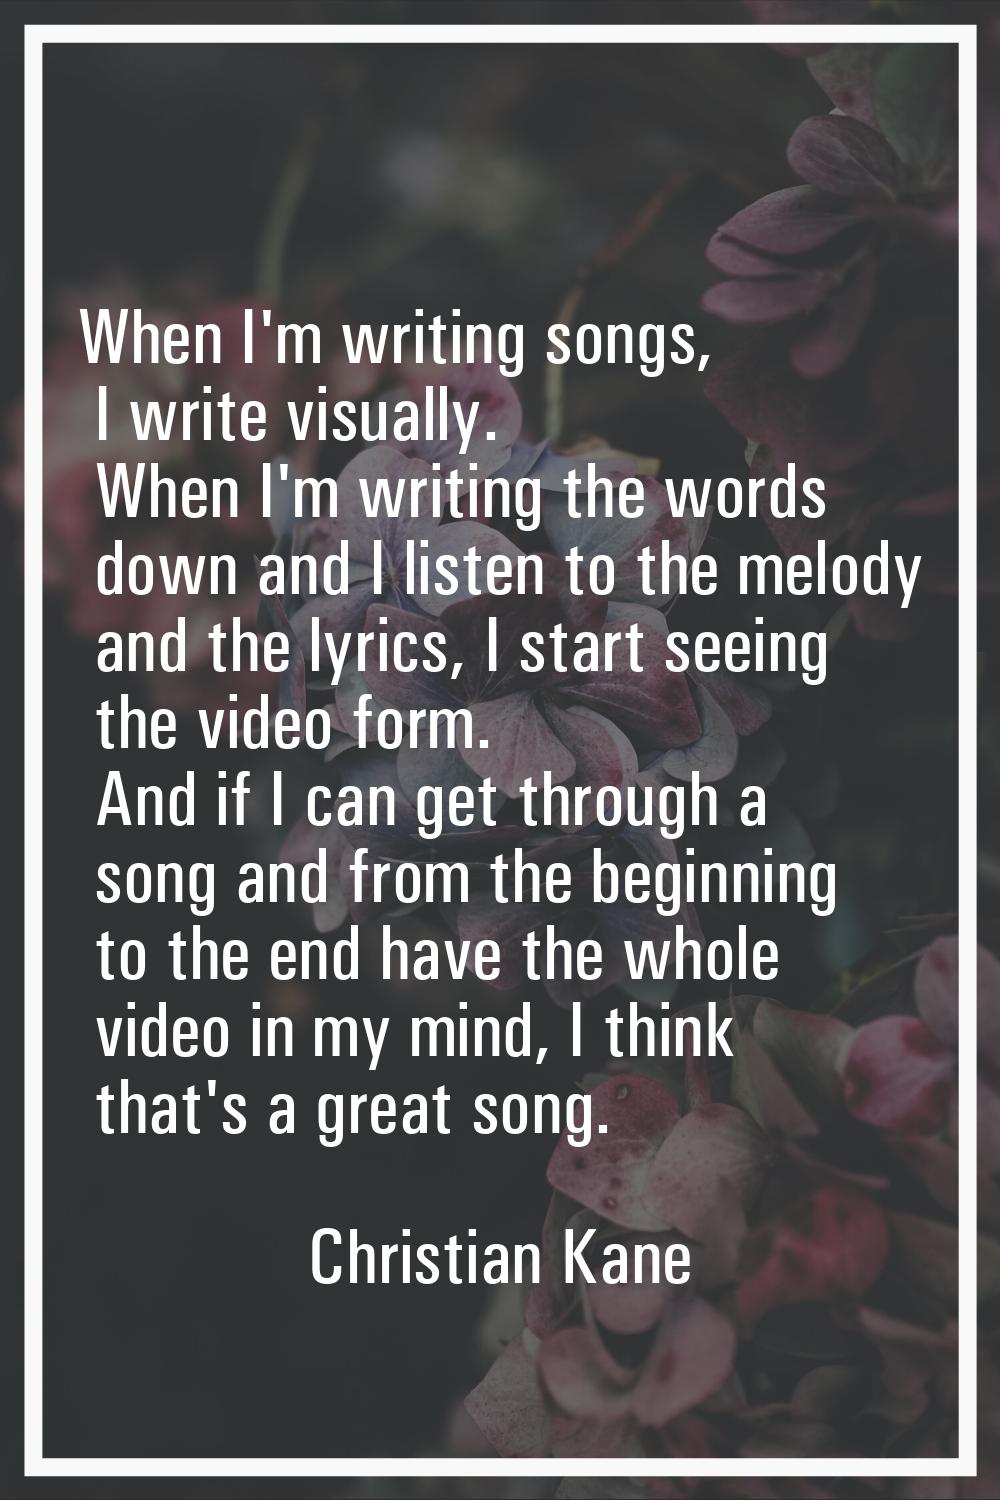 When I'm writing songs, I write visually. When I'm writing the words down and I listen to the melod